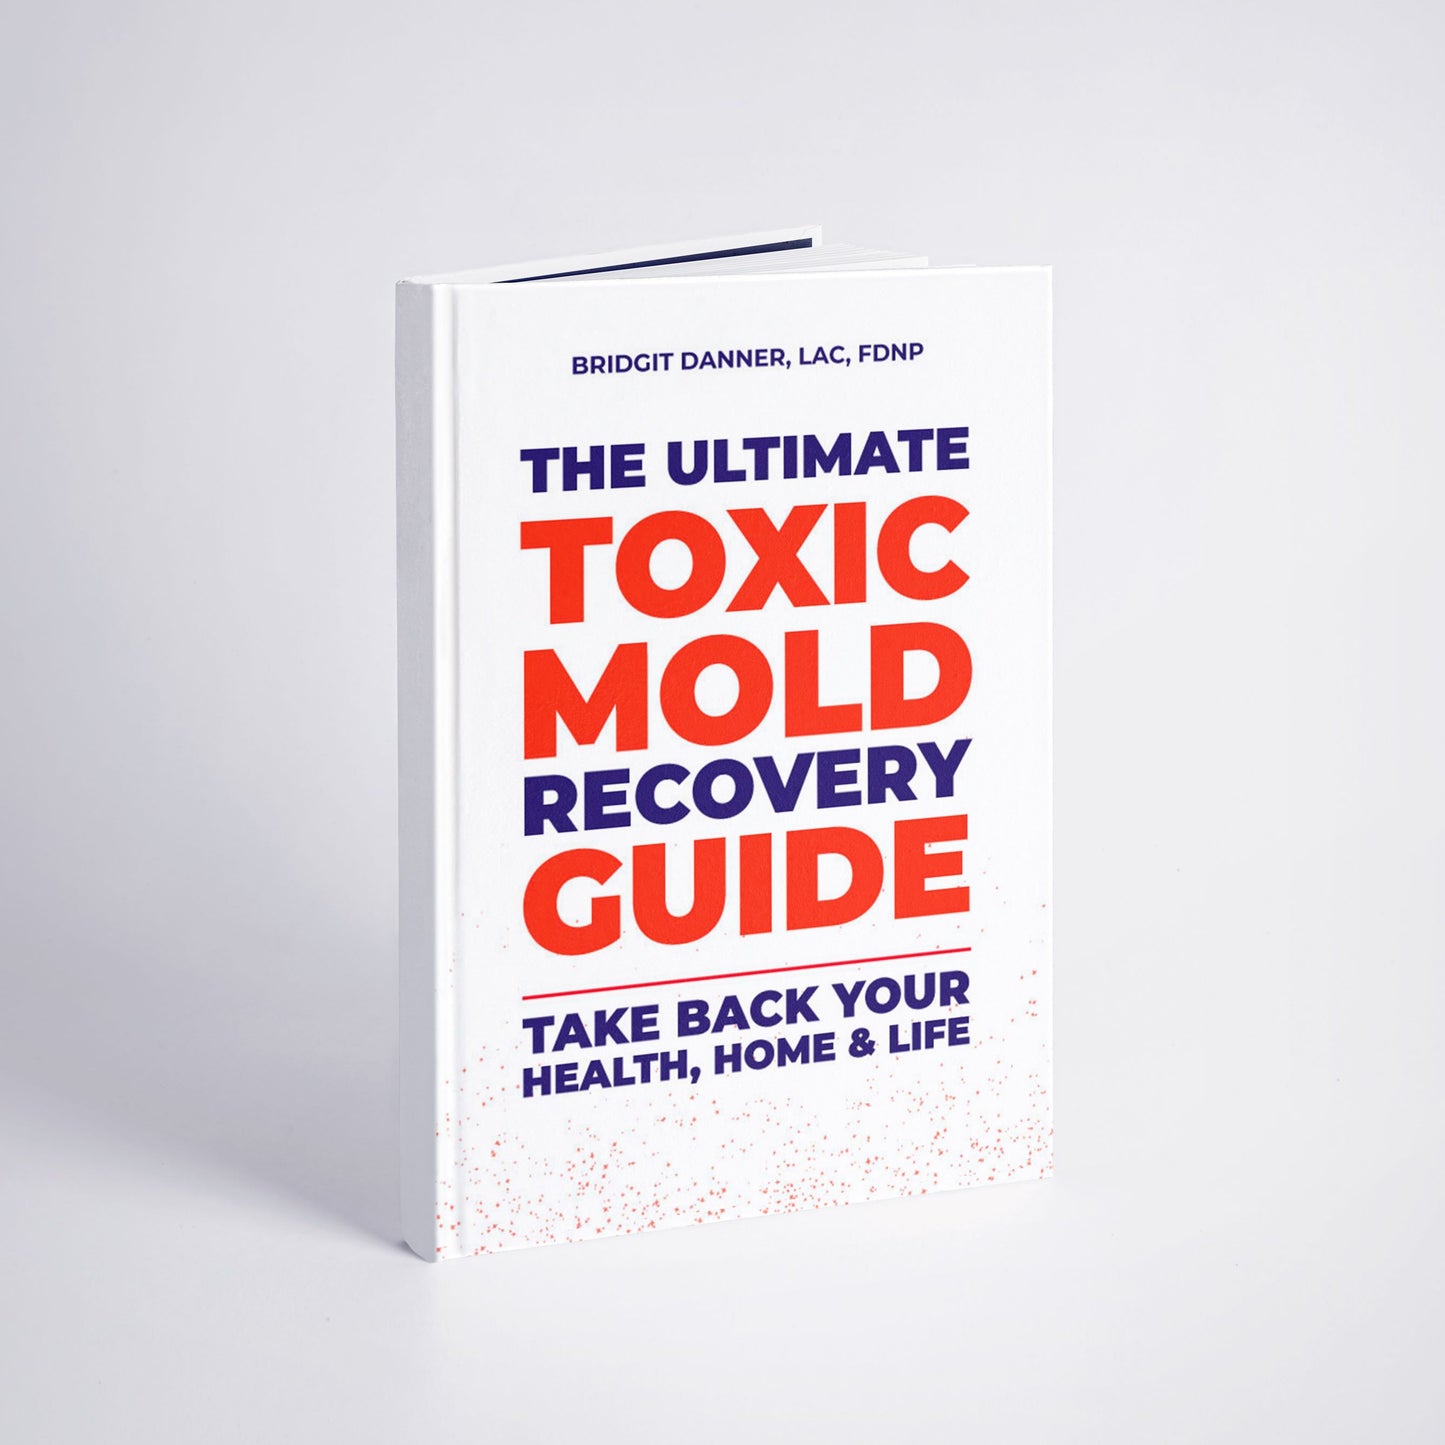 The Ultimate Toxic Mold Recovery Guide